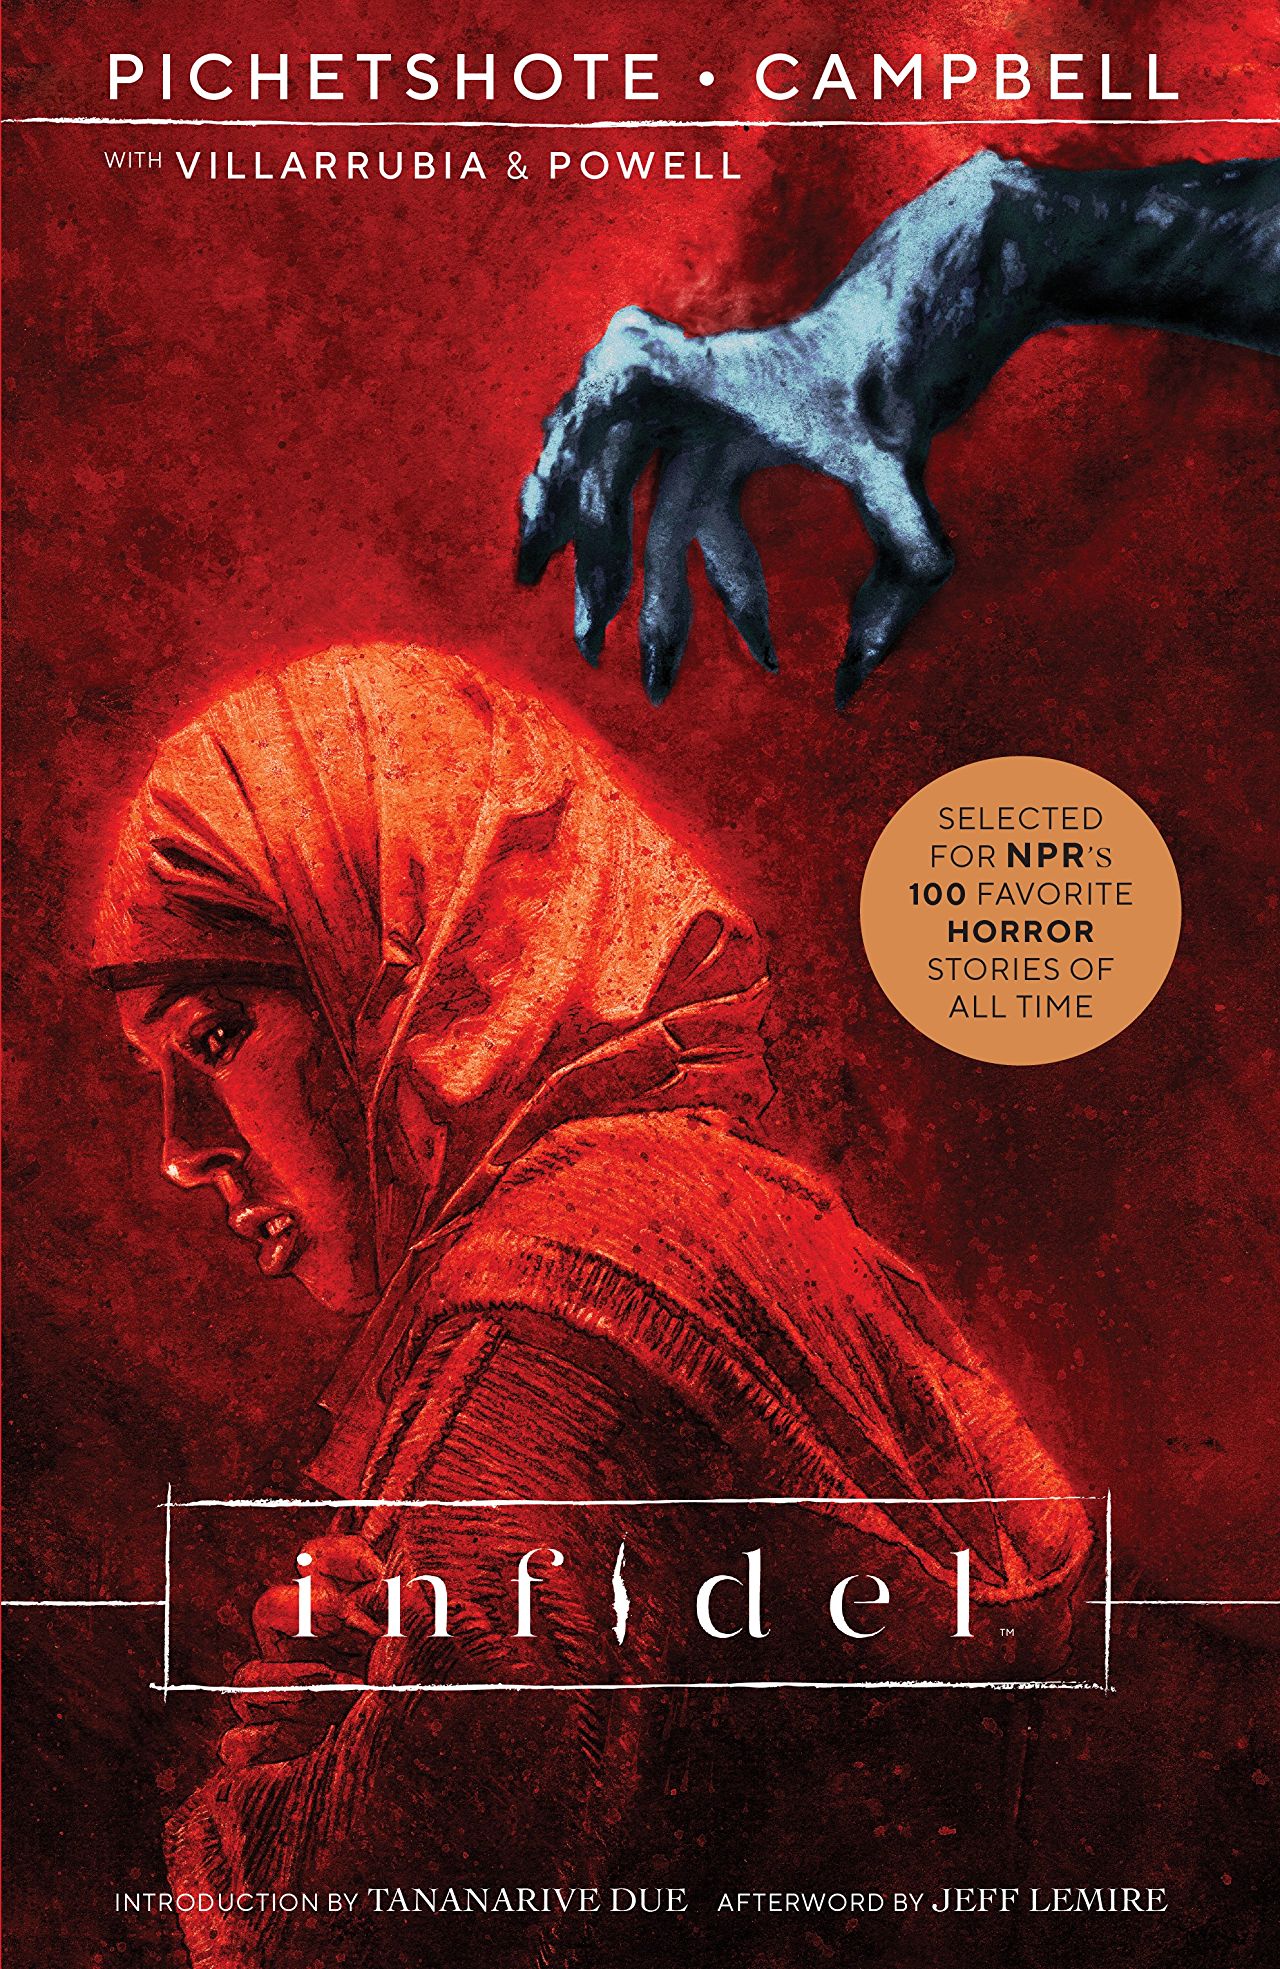 'Infidel' is one of the scariest horror comics ever published